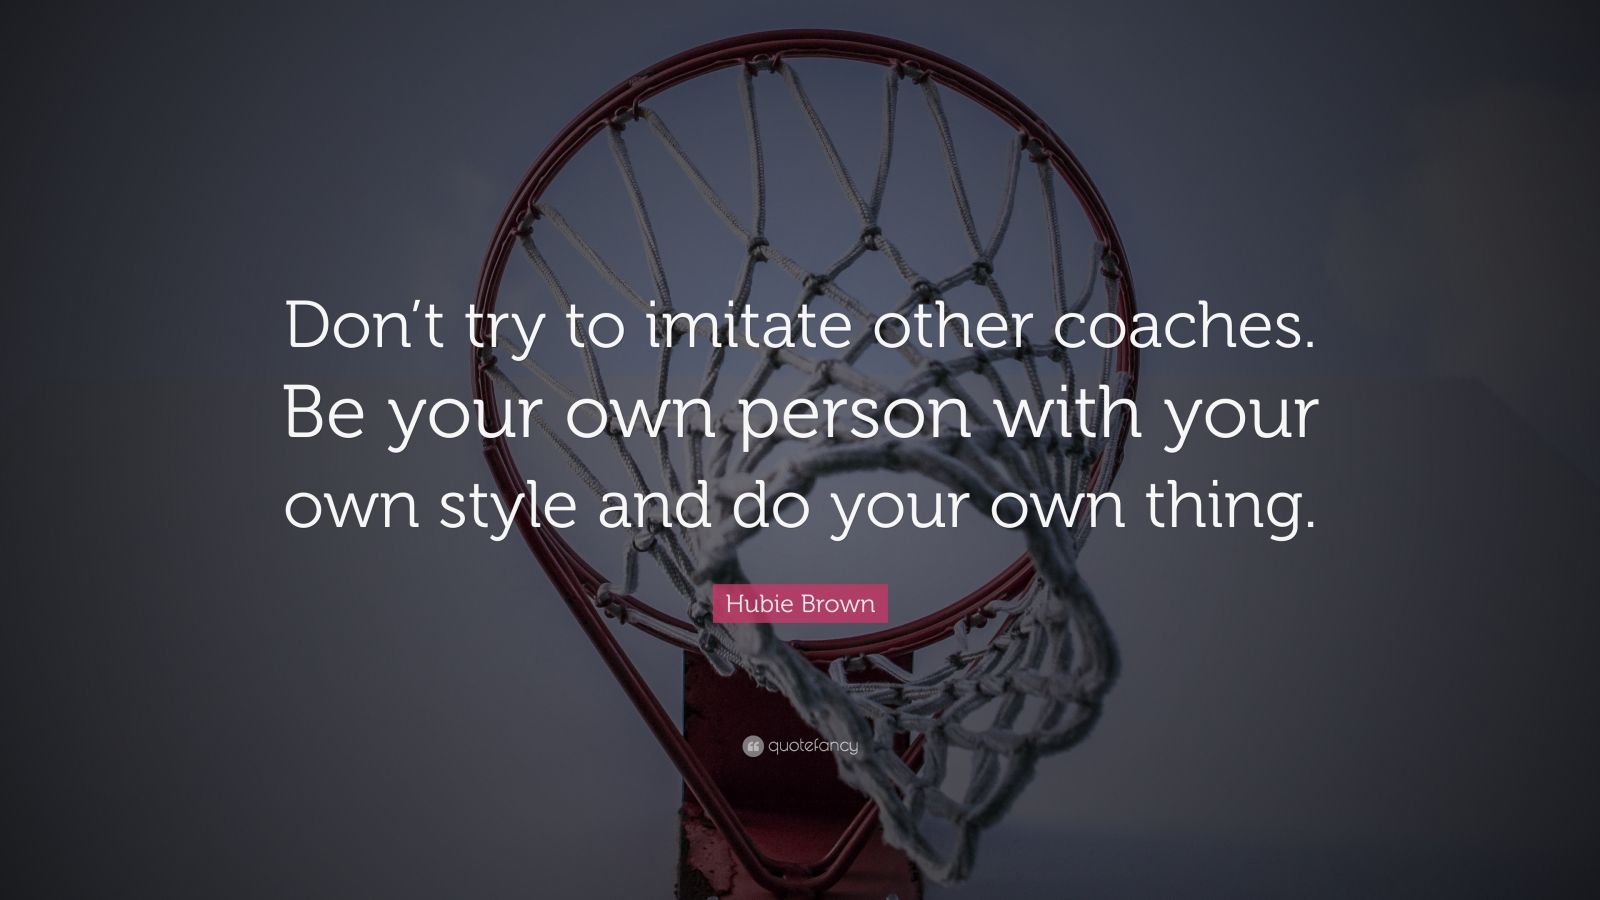 Hubie Brown Quote: “Don’t try to imitate other coaches. Be your own ...